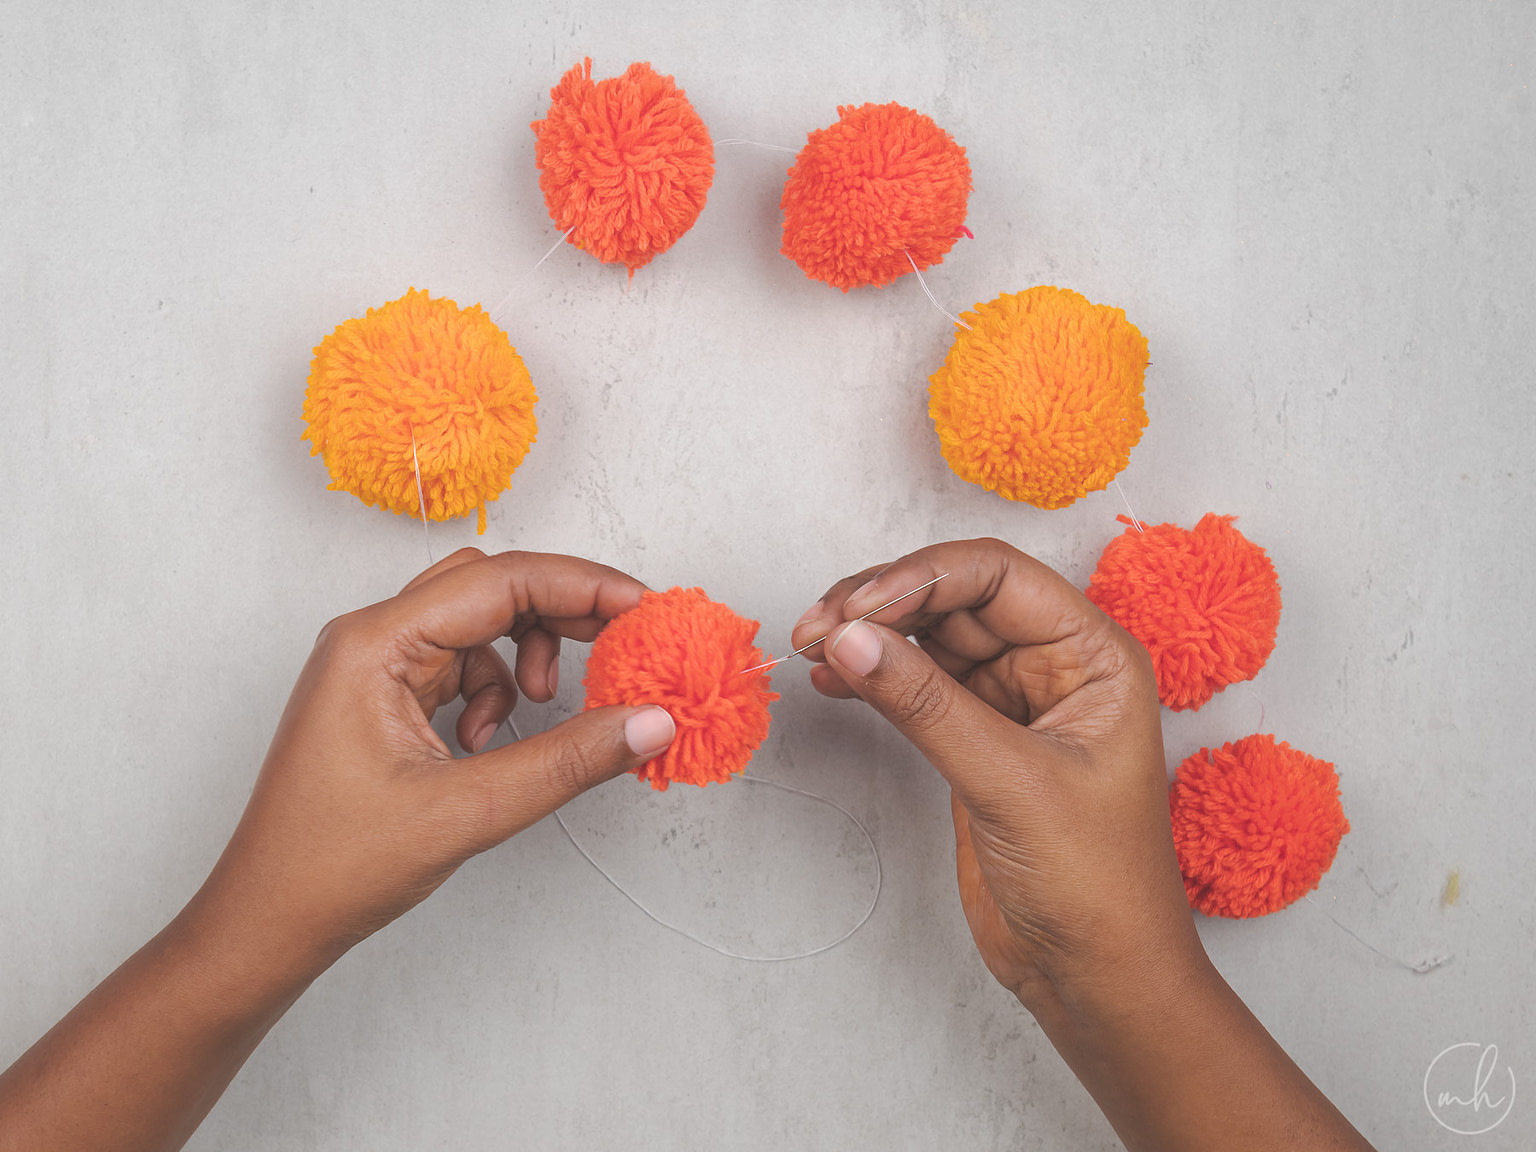 Two hands running a threaded needle through red-yellow pompoms